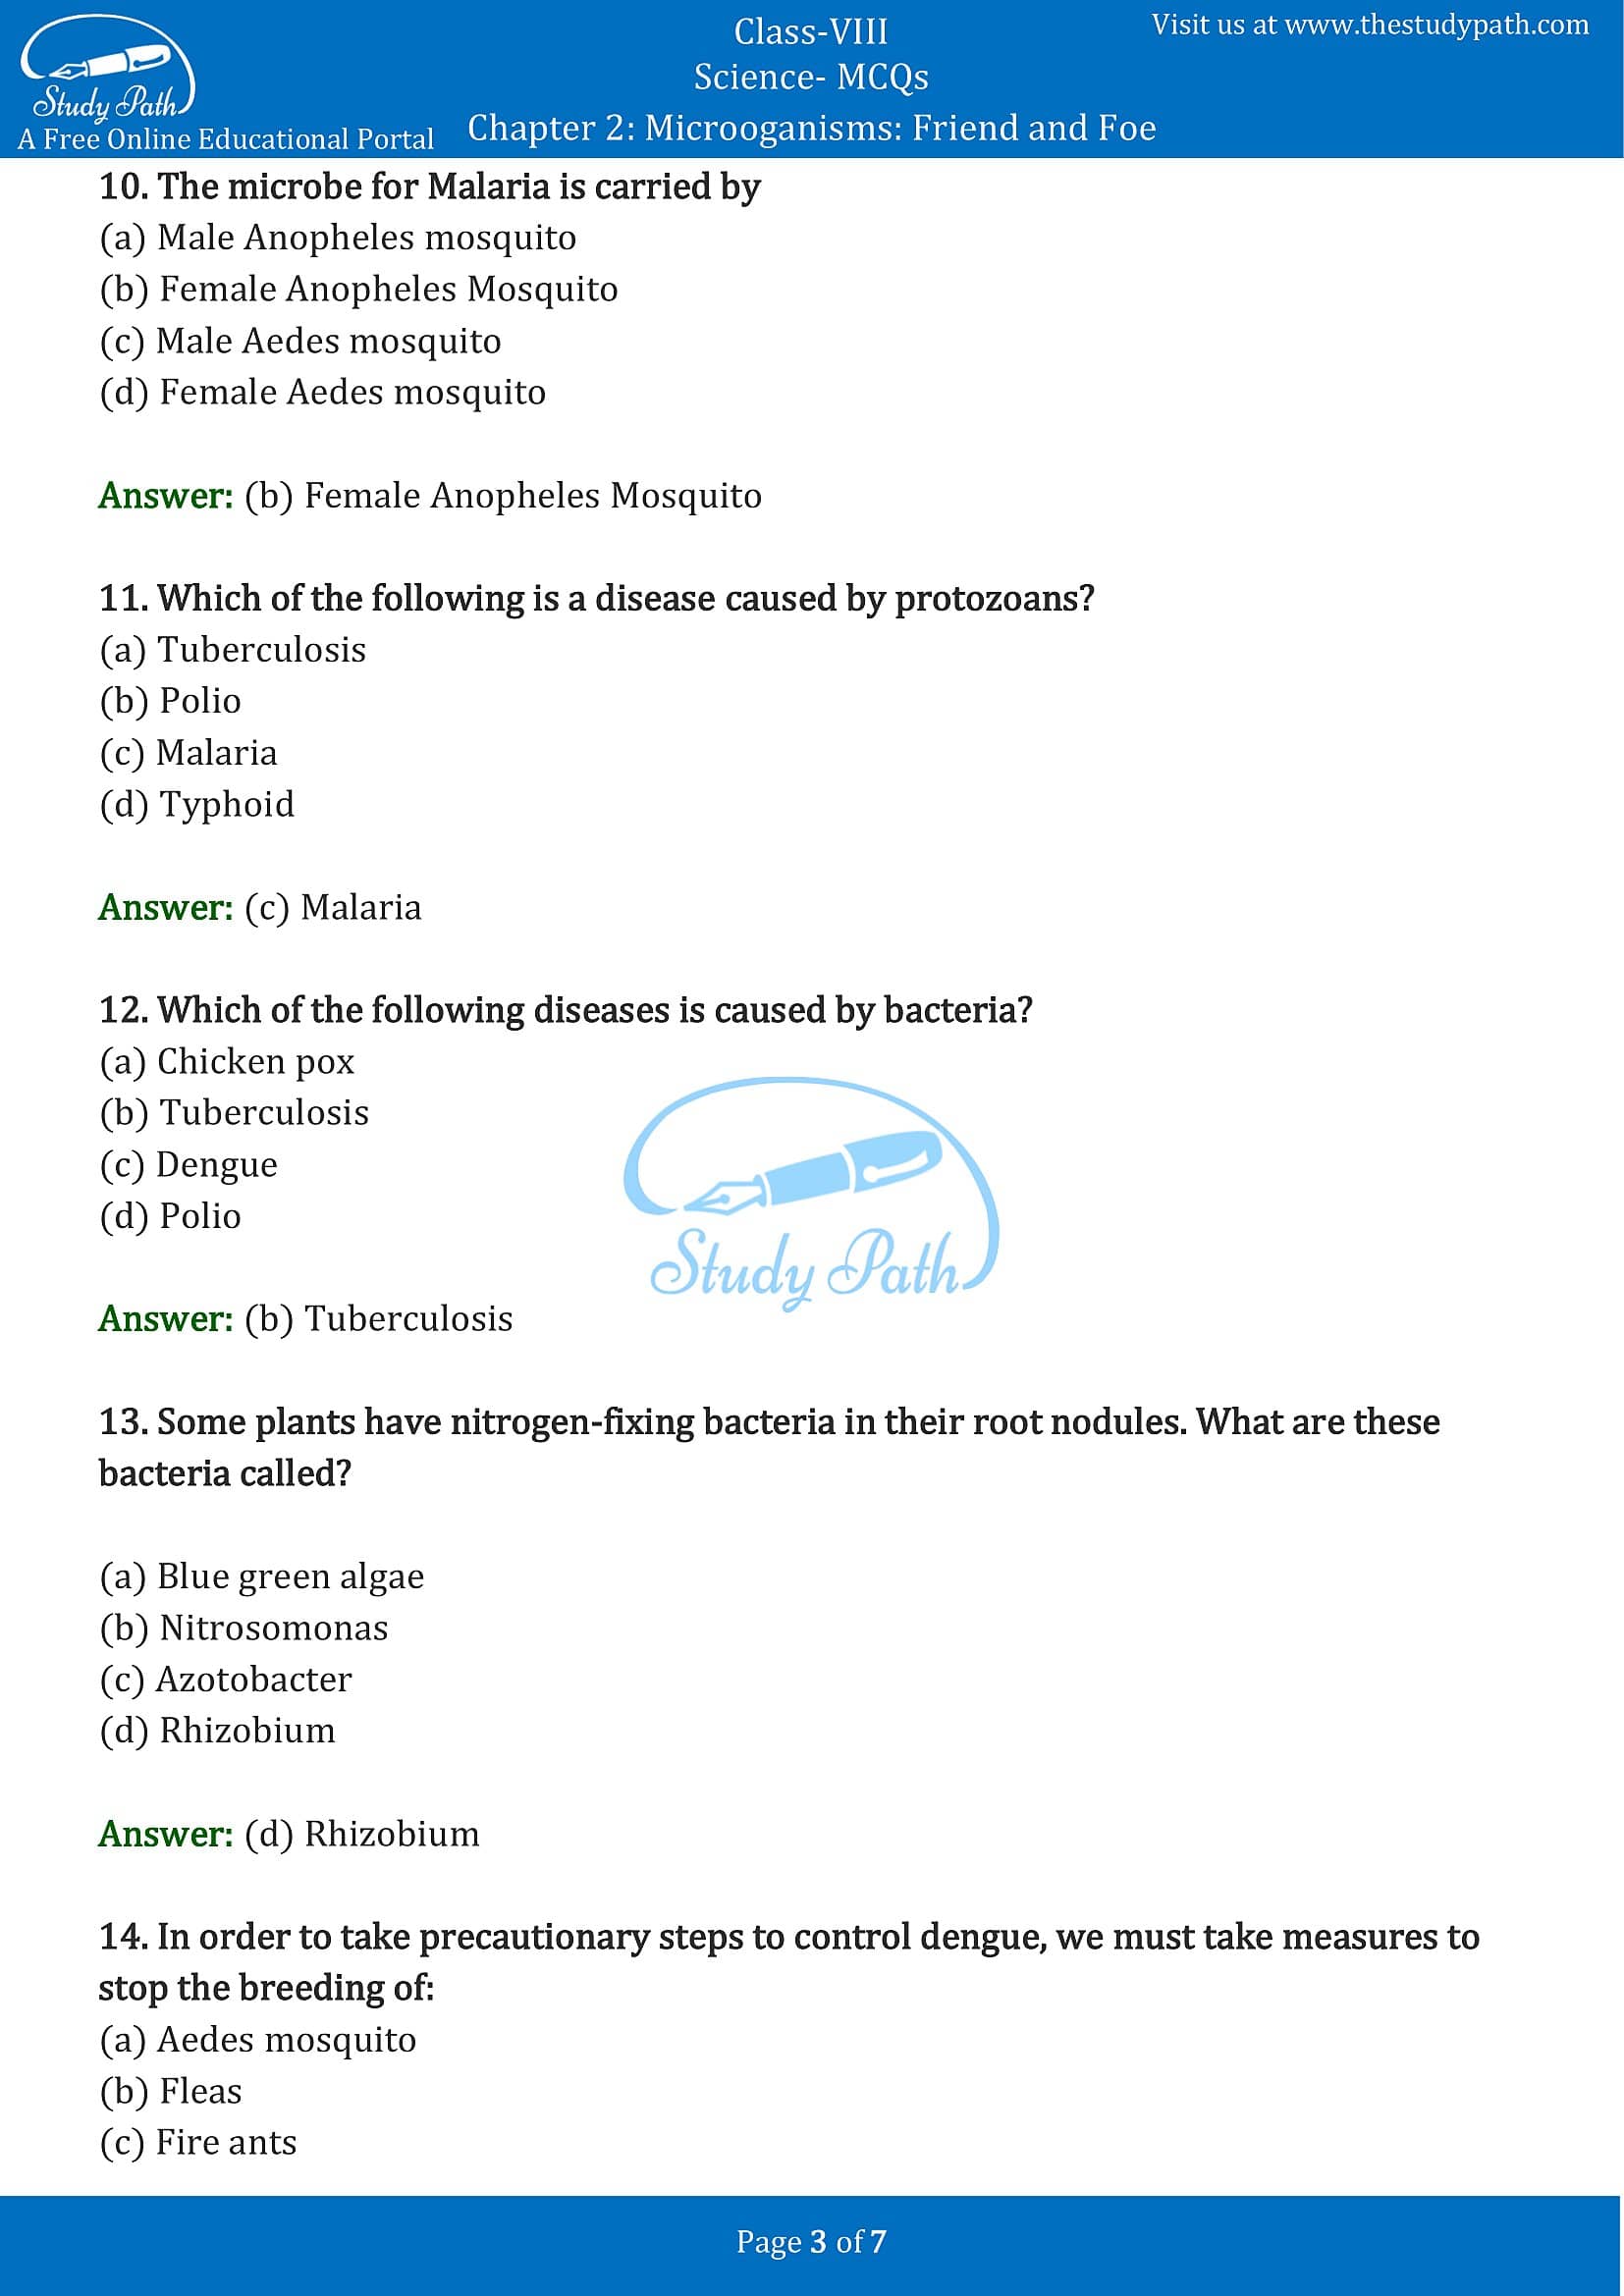 MCQ Questions for Class 8 Science Chapter 2 Microoganisms Friend and Foe with Answers PDF -3